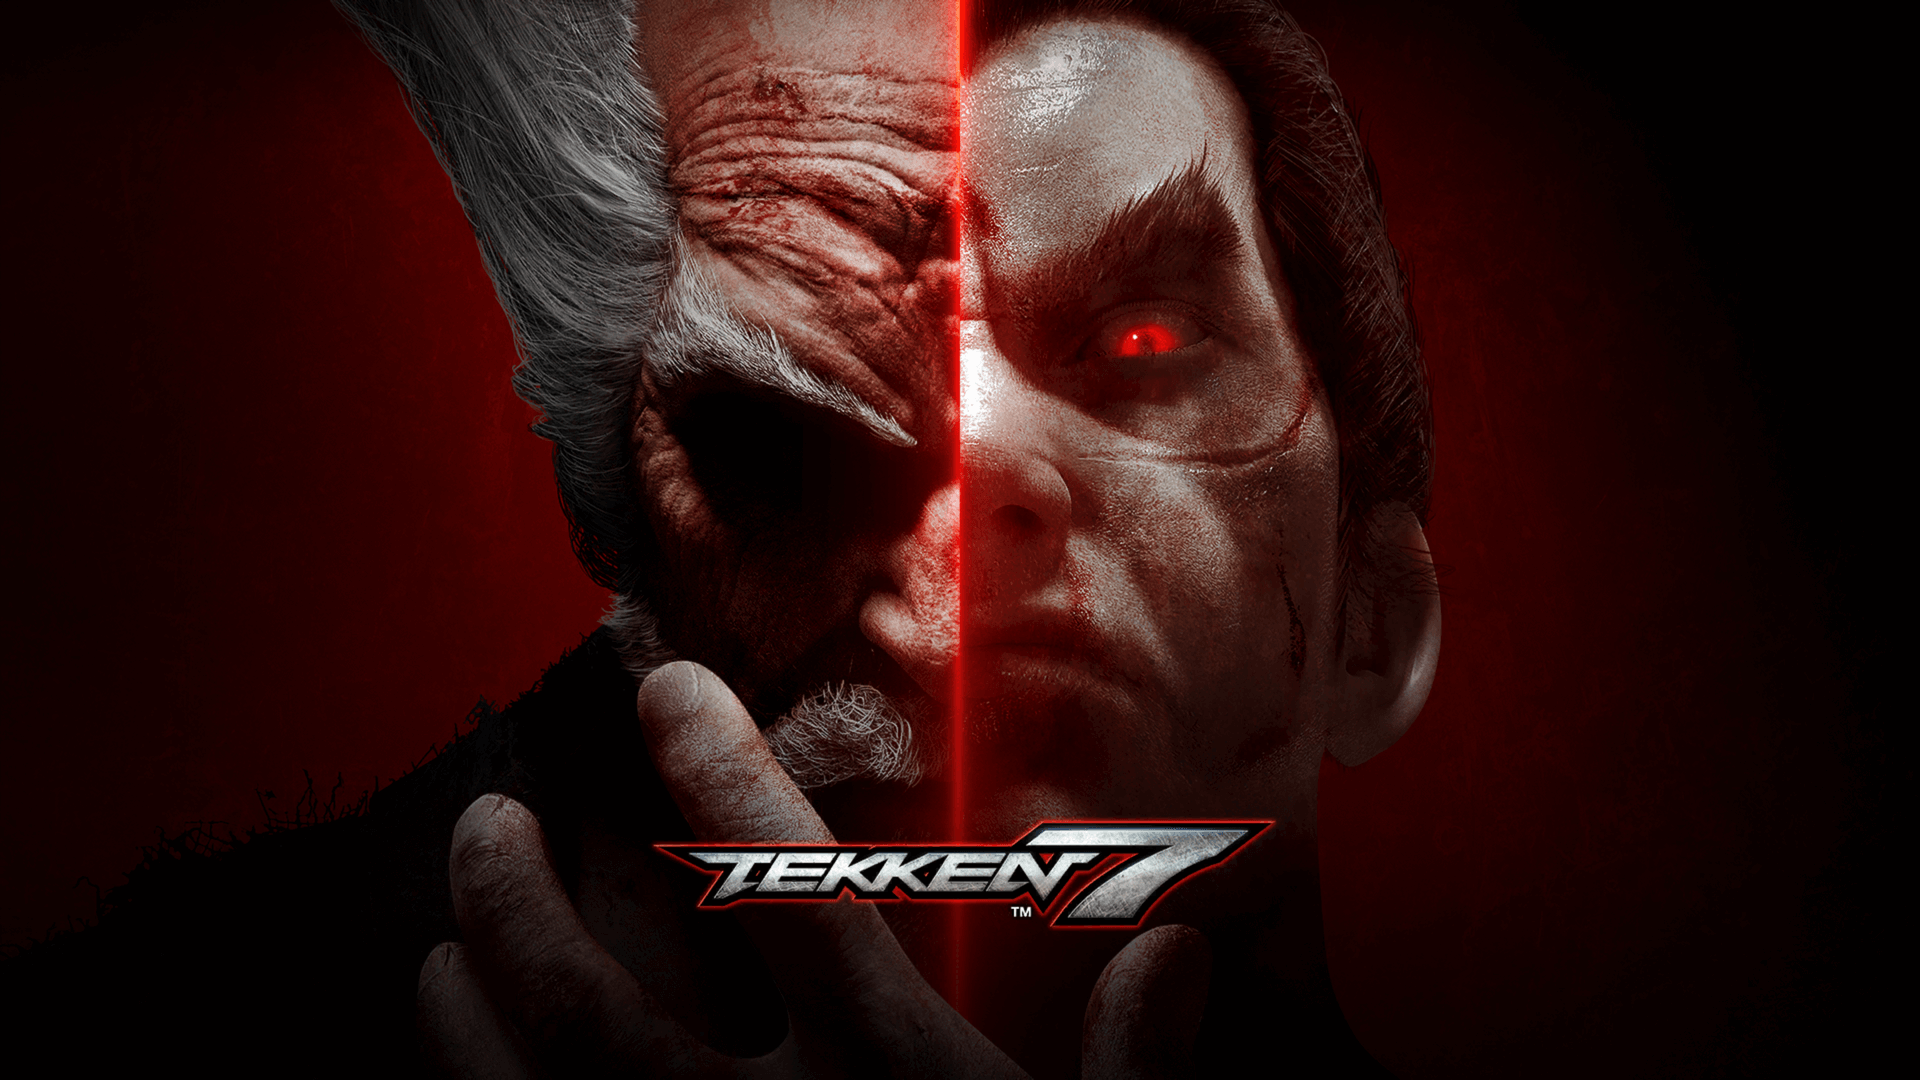 Tekken 7 and MK 11 entered the list of the best fighting games for PS4